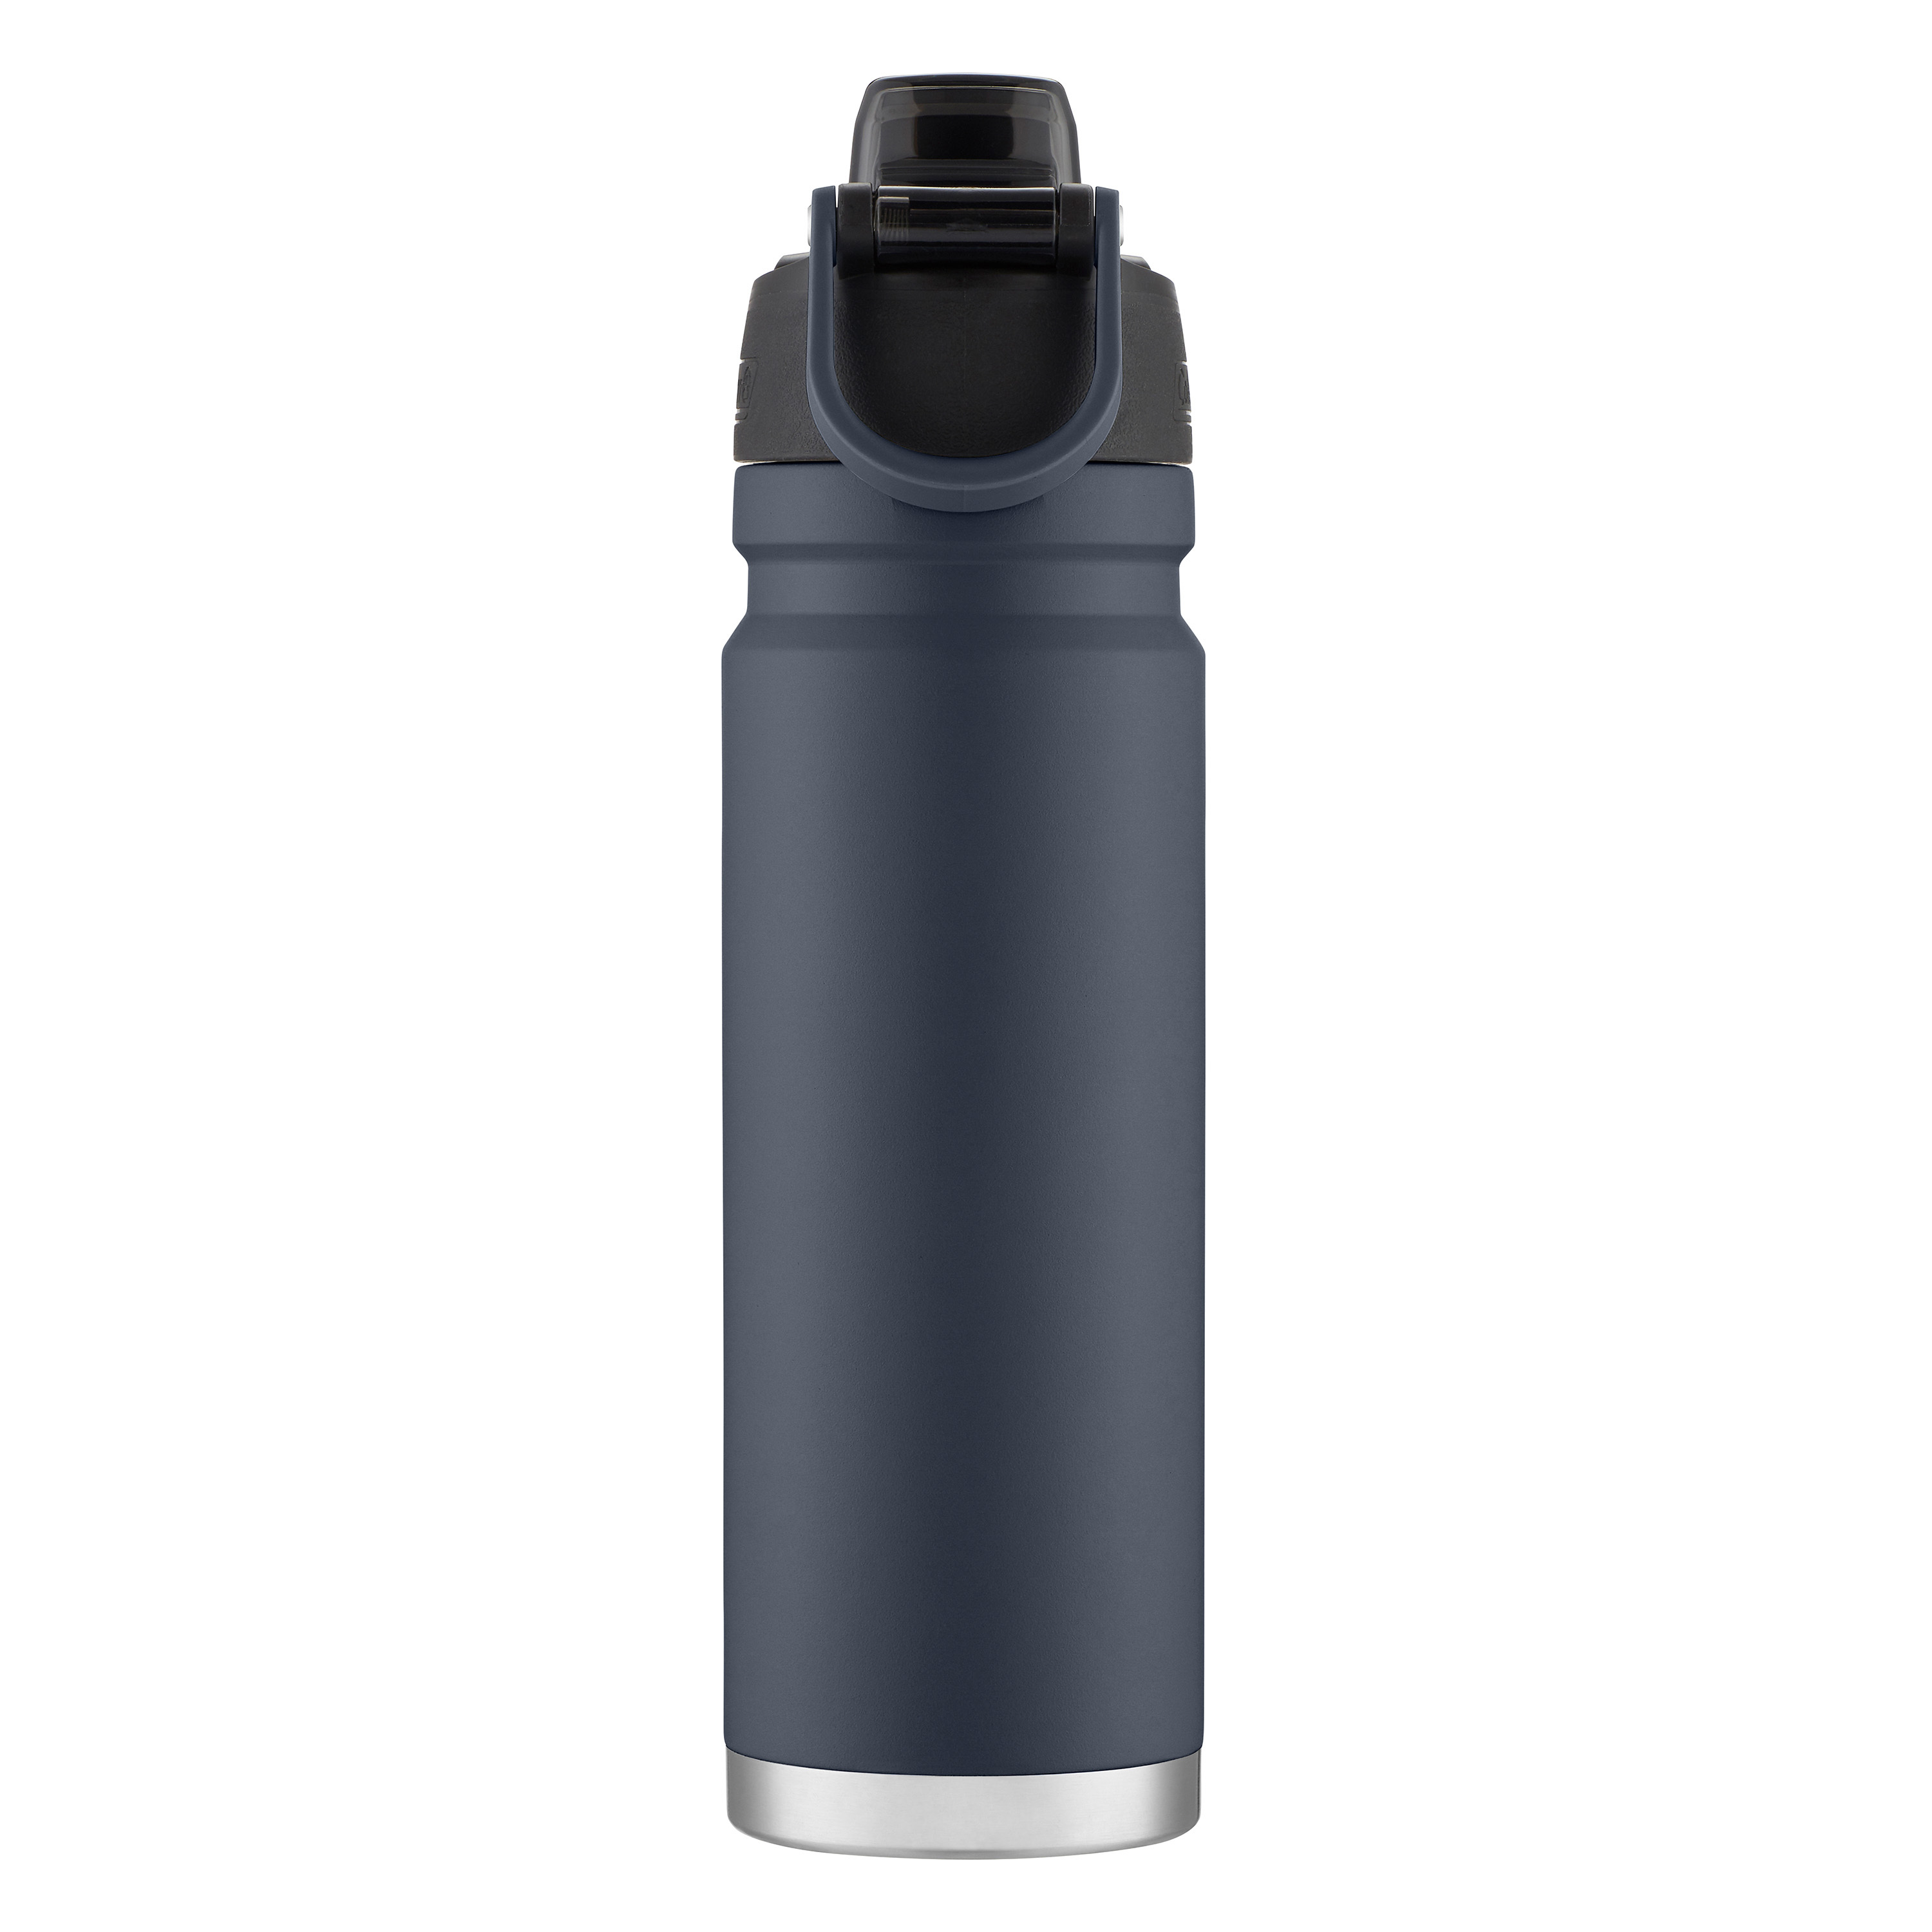 Coleman Burst Poptop Stainless Steel Insulated Water Bottle, 24 oz, Blue Nights - image 3 of 7